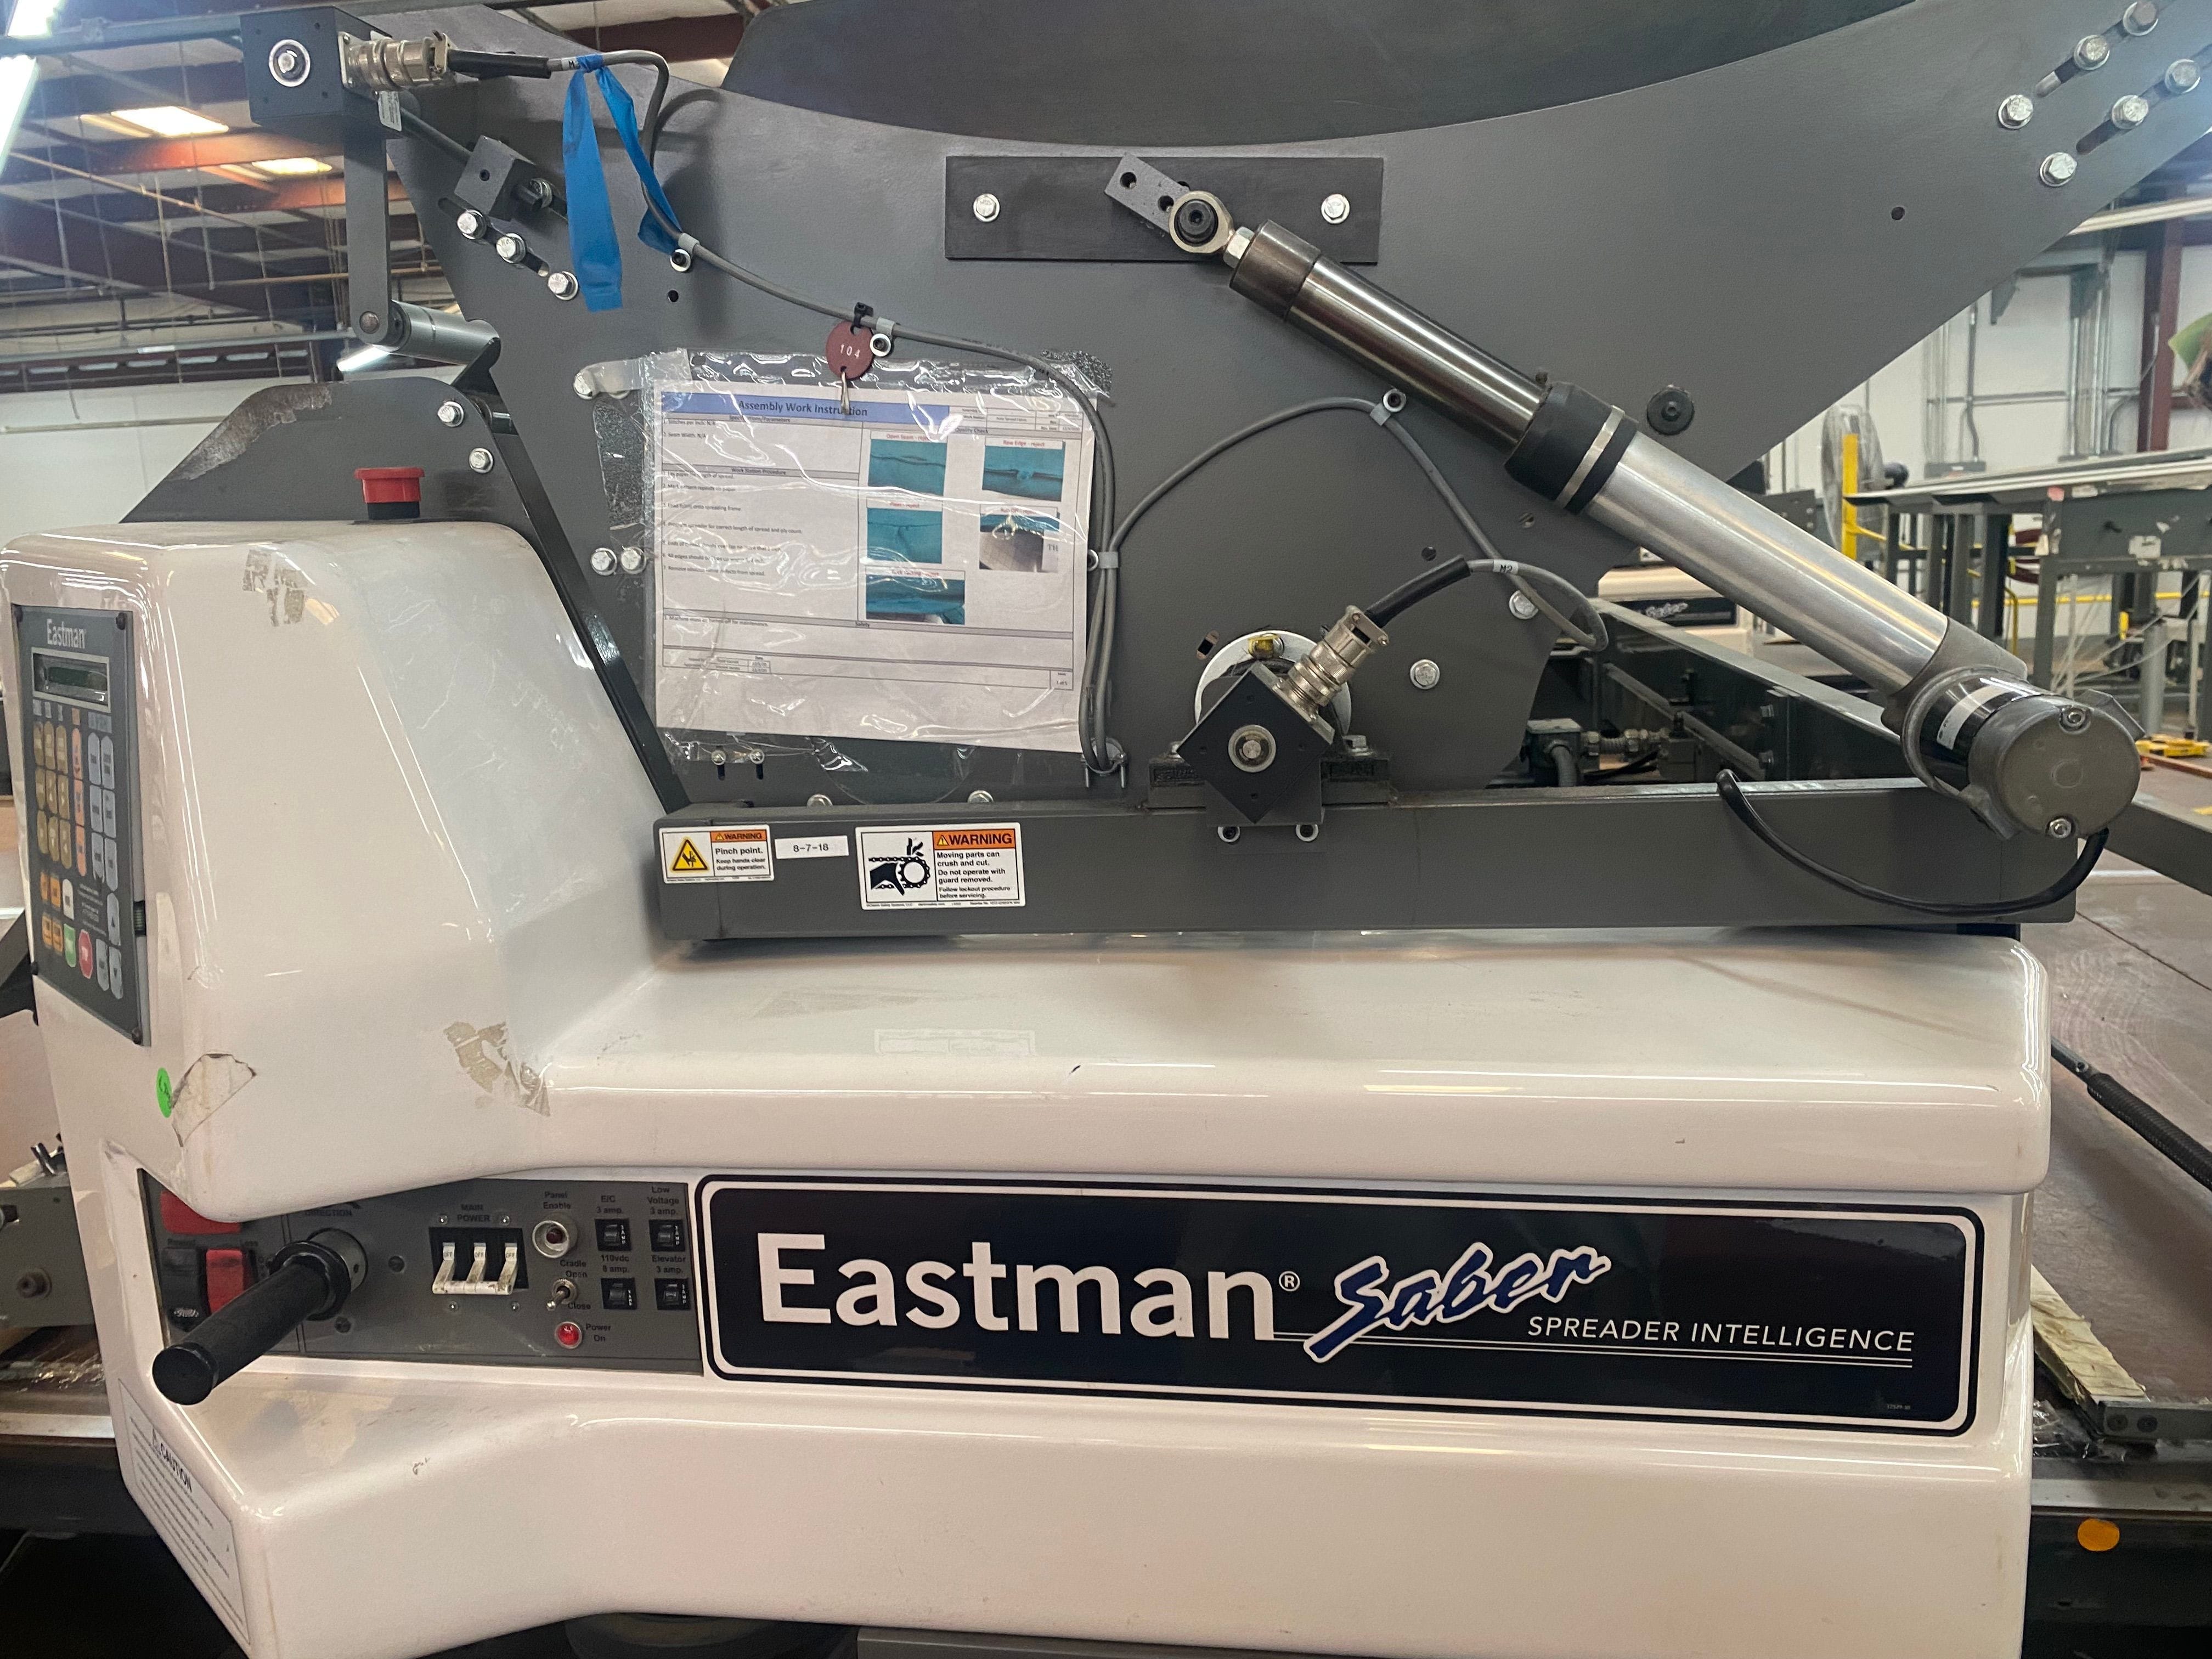 EASTMAN
MODEL: SABER ST-C-250-0011
AUTOMATIC SPREADING MACHINE
MAXIMUM ROLL WIDTH: 72"
MAXIMUM ROLL WEIGHT: 250 LBS.
YEAR OF MANUFACTURE: 2014